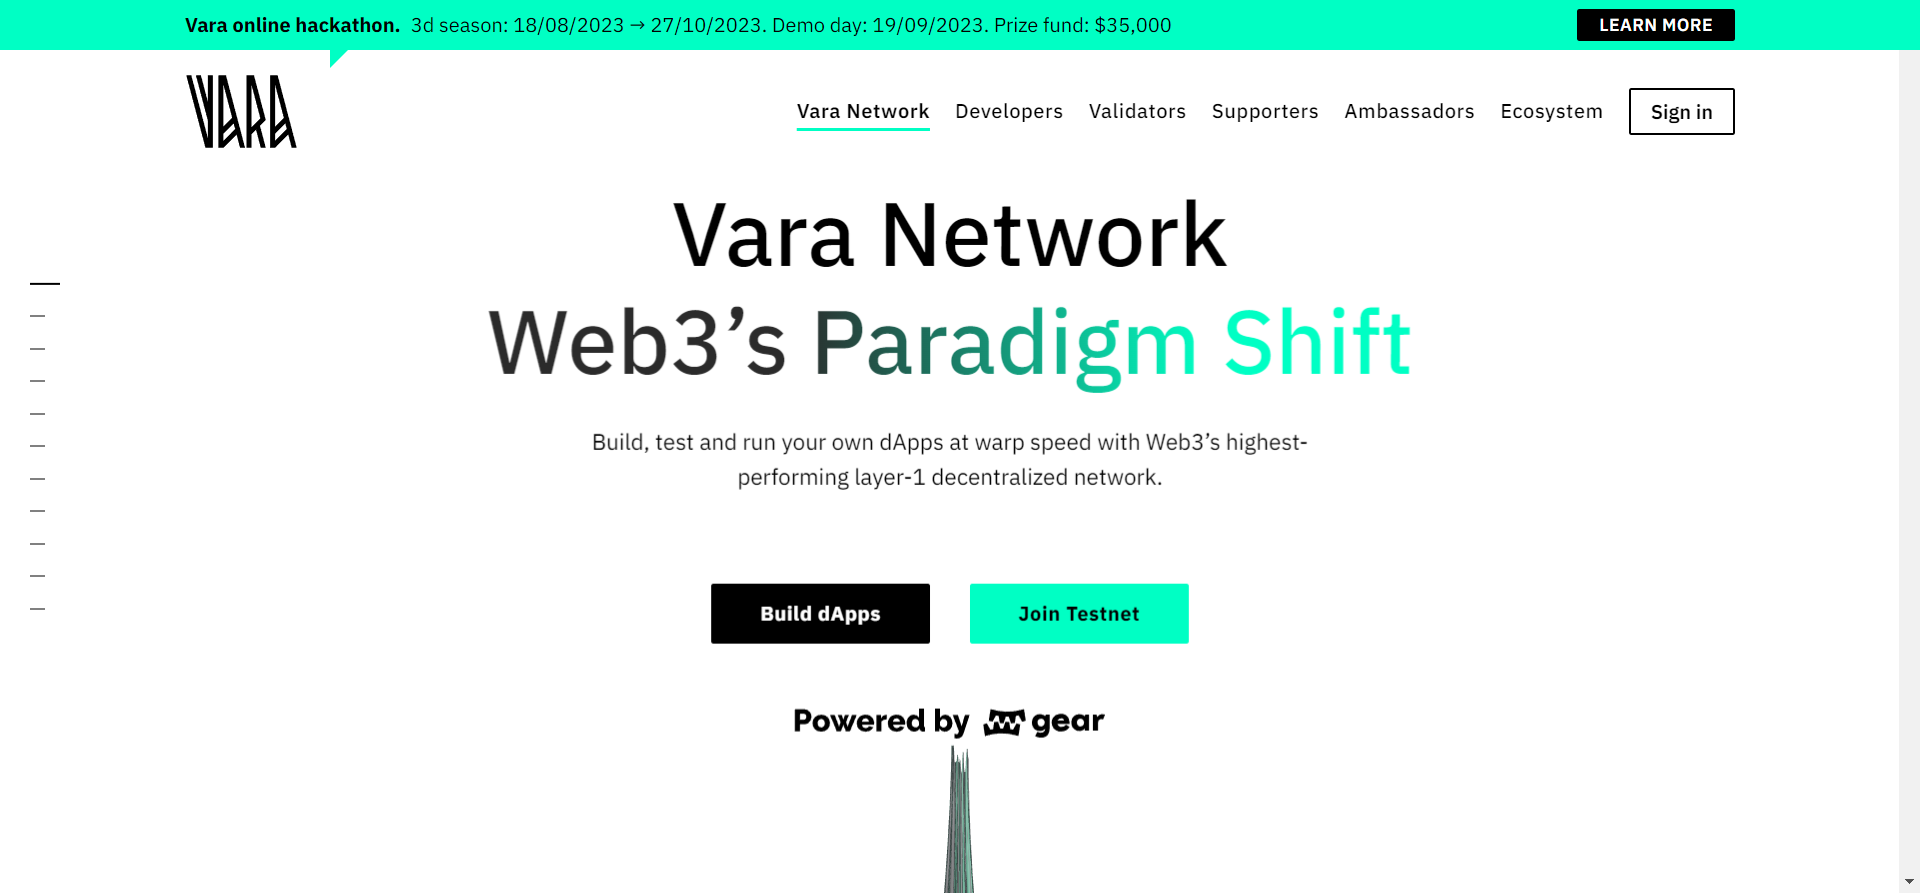 Vara Network launches in mainnet